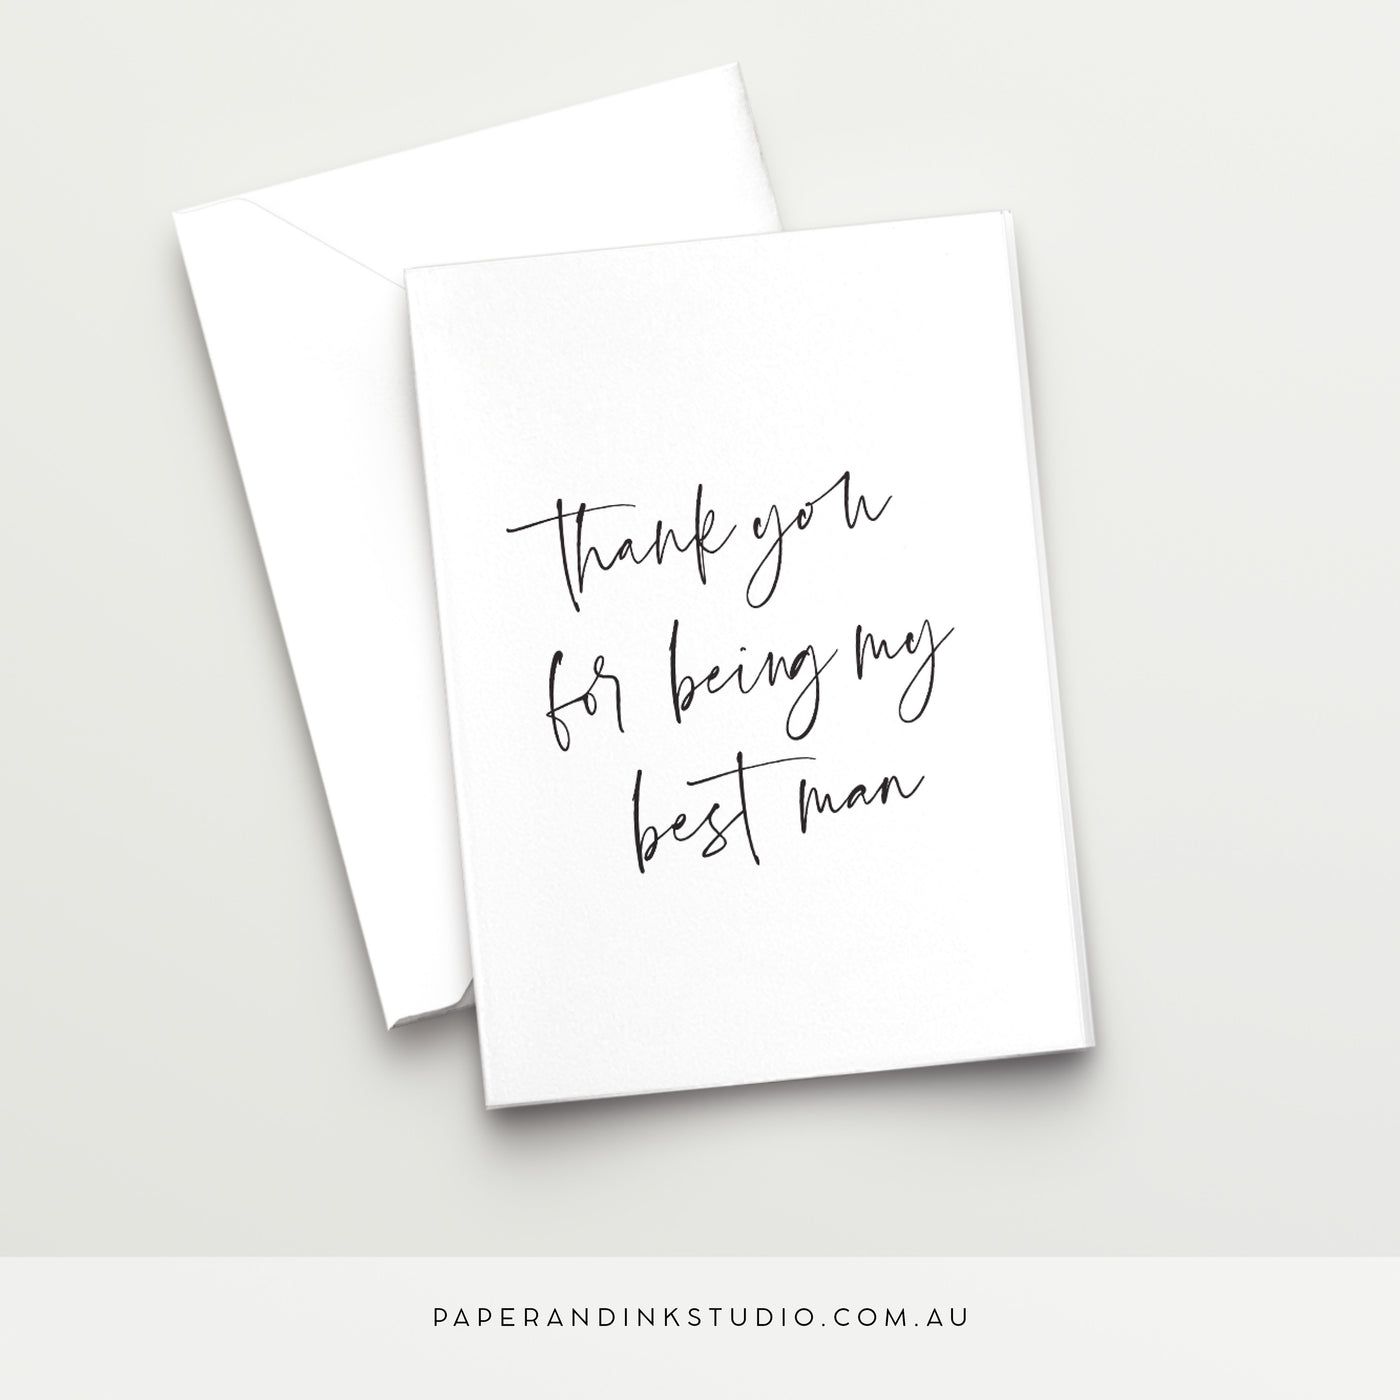 A white folded wedding card in a design called Thorne with black writing that says thank you for being my best man, to give to your best man on or after your wedding day.